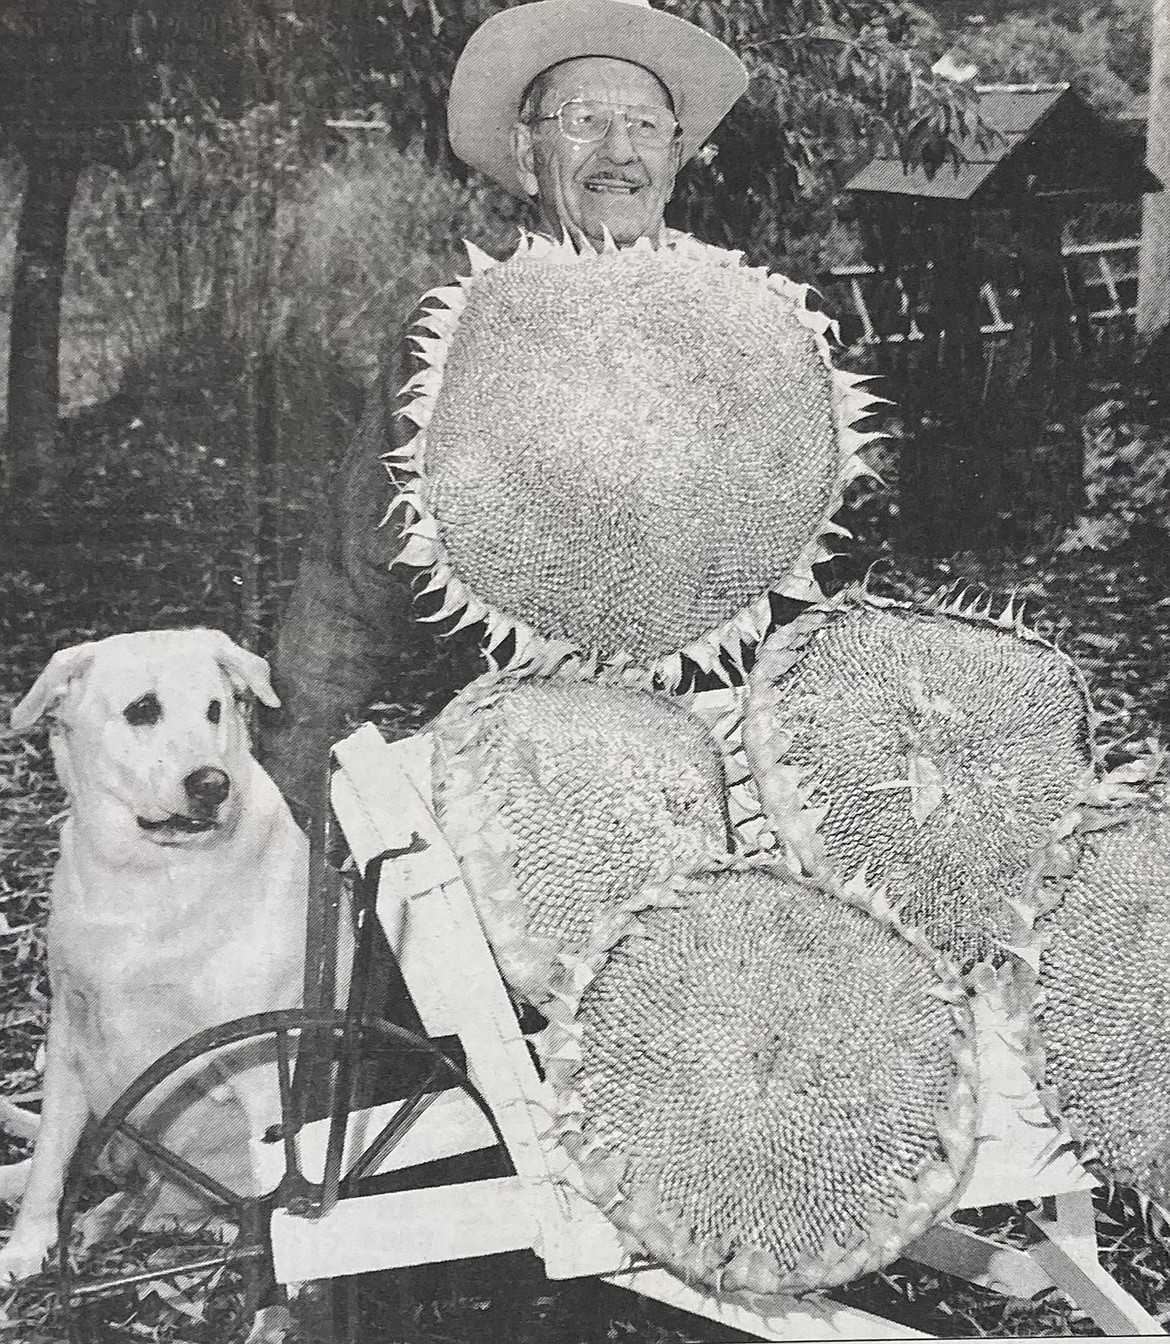 John Ruthven and his world-record sunflowers.